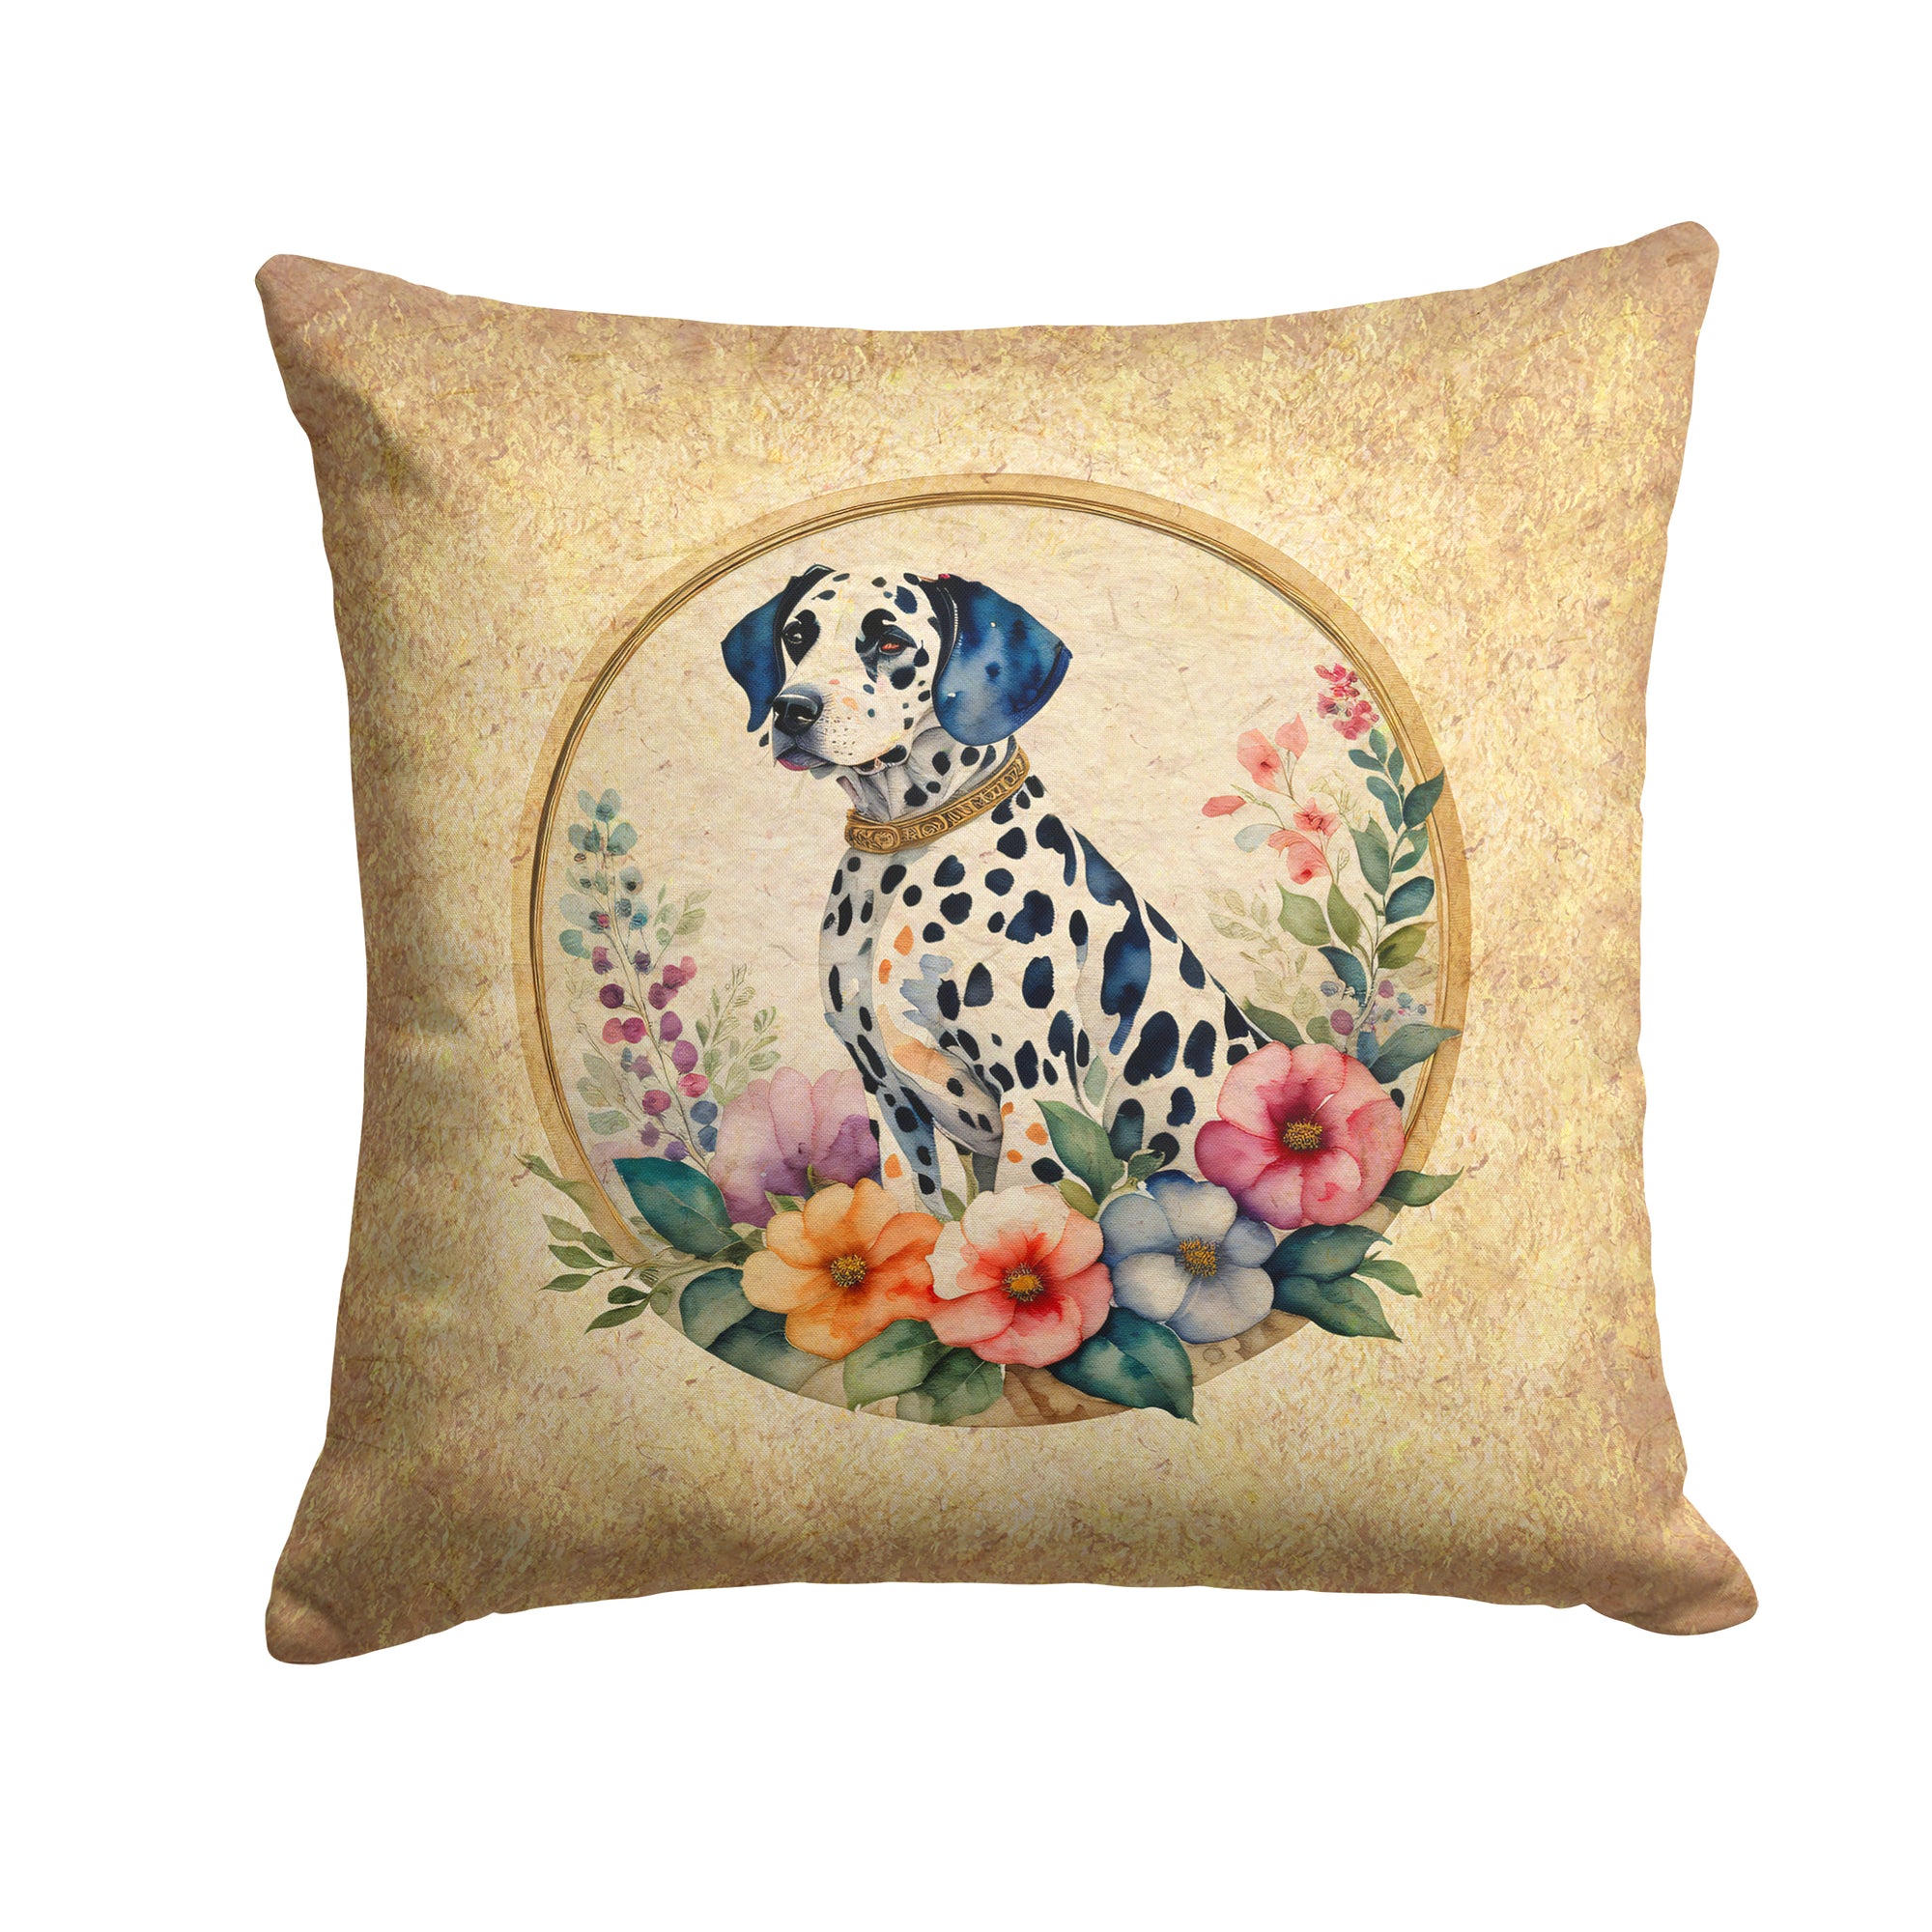 Buy this Dalmatian and Flowers Fabric Decorative Pillow